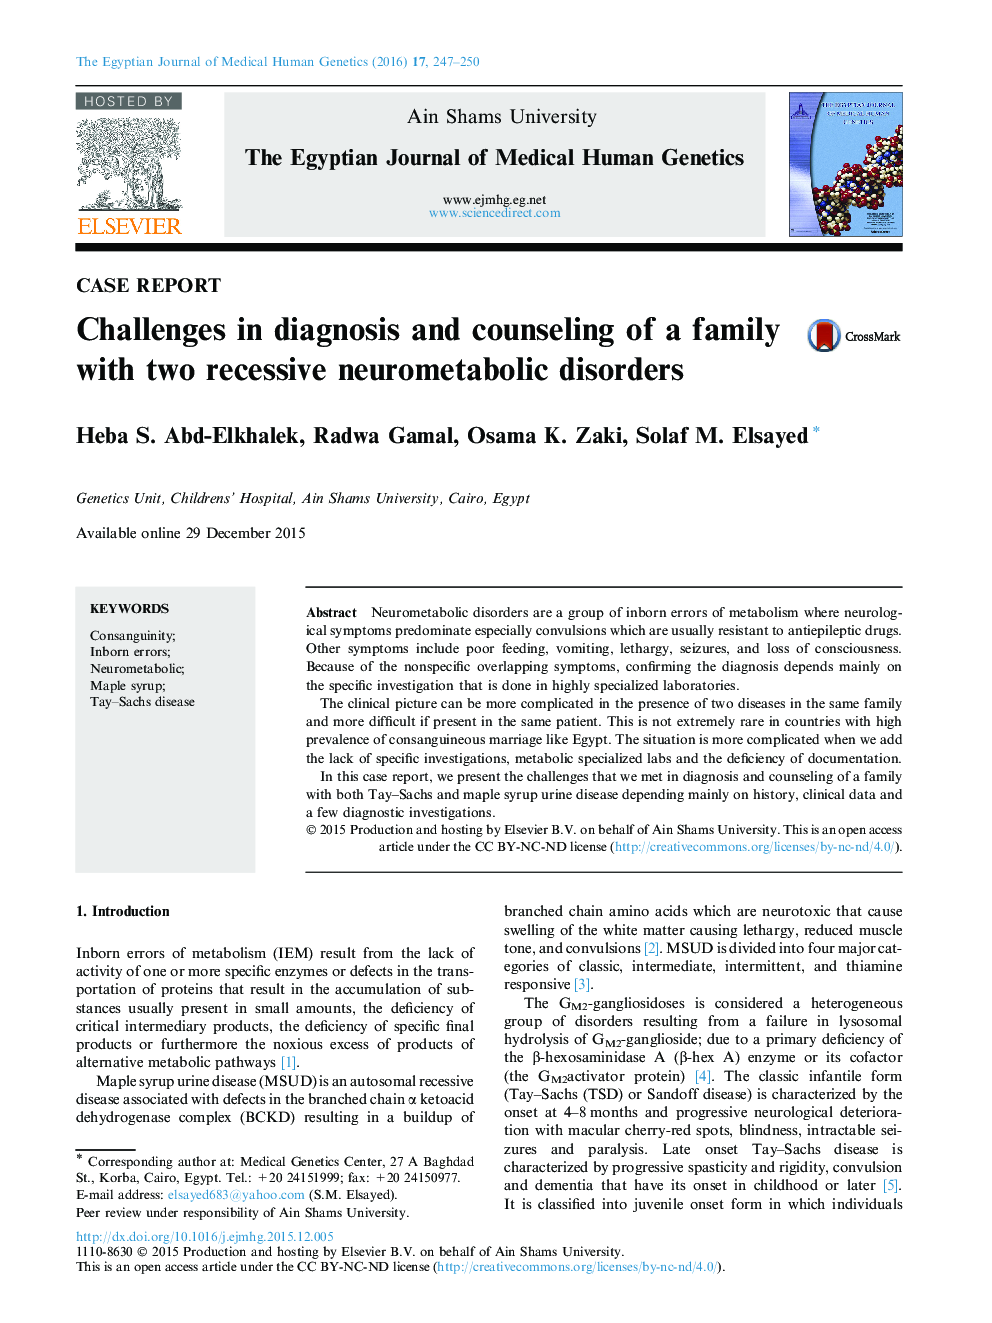 Challenges in diagnosis and counseling of a family with two recessive neurometabolic disorders 